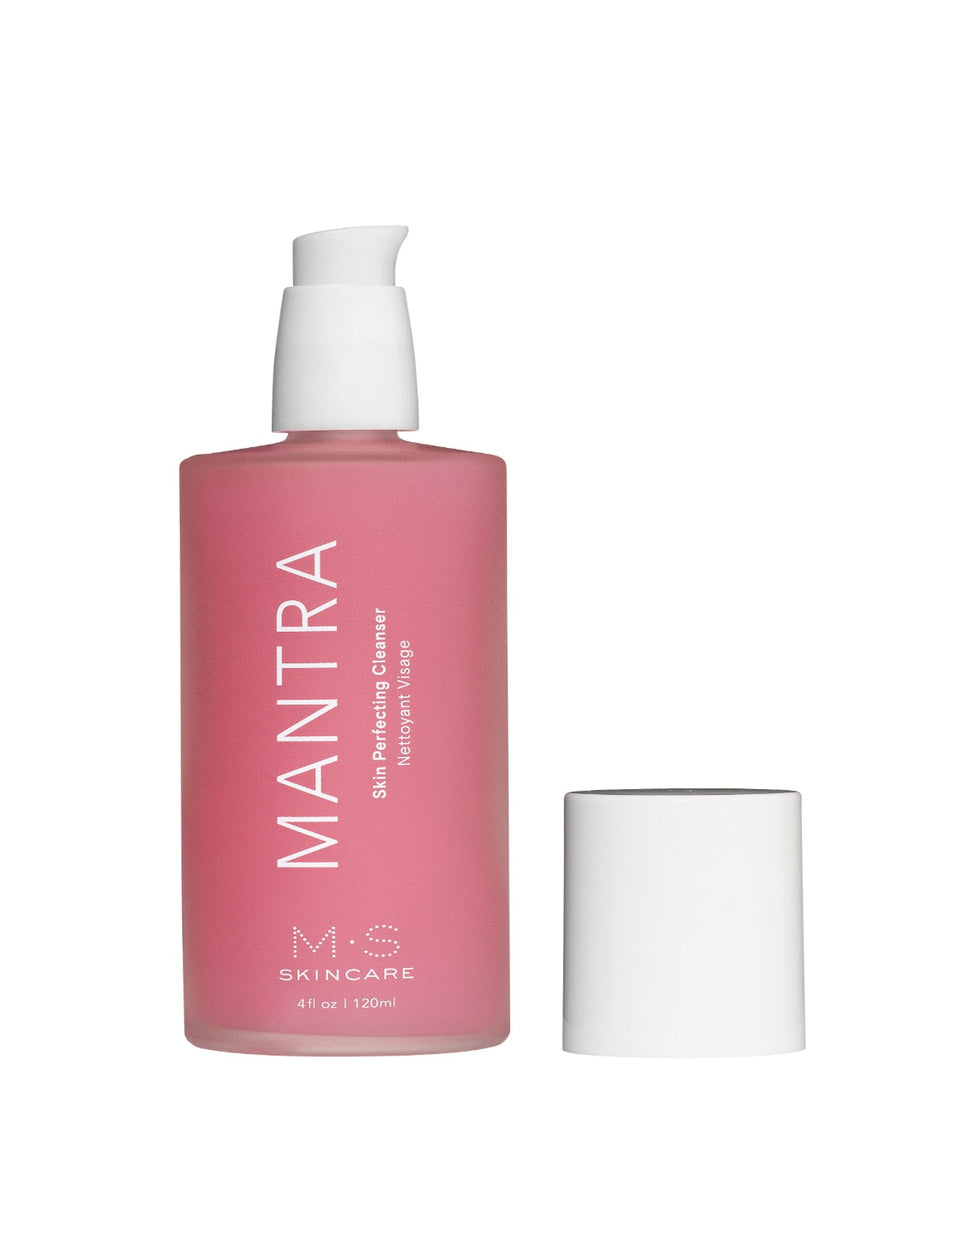 MANTRA Skin Perfecting Cleanser